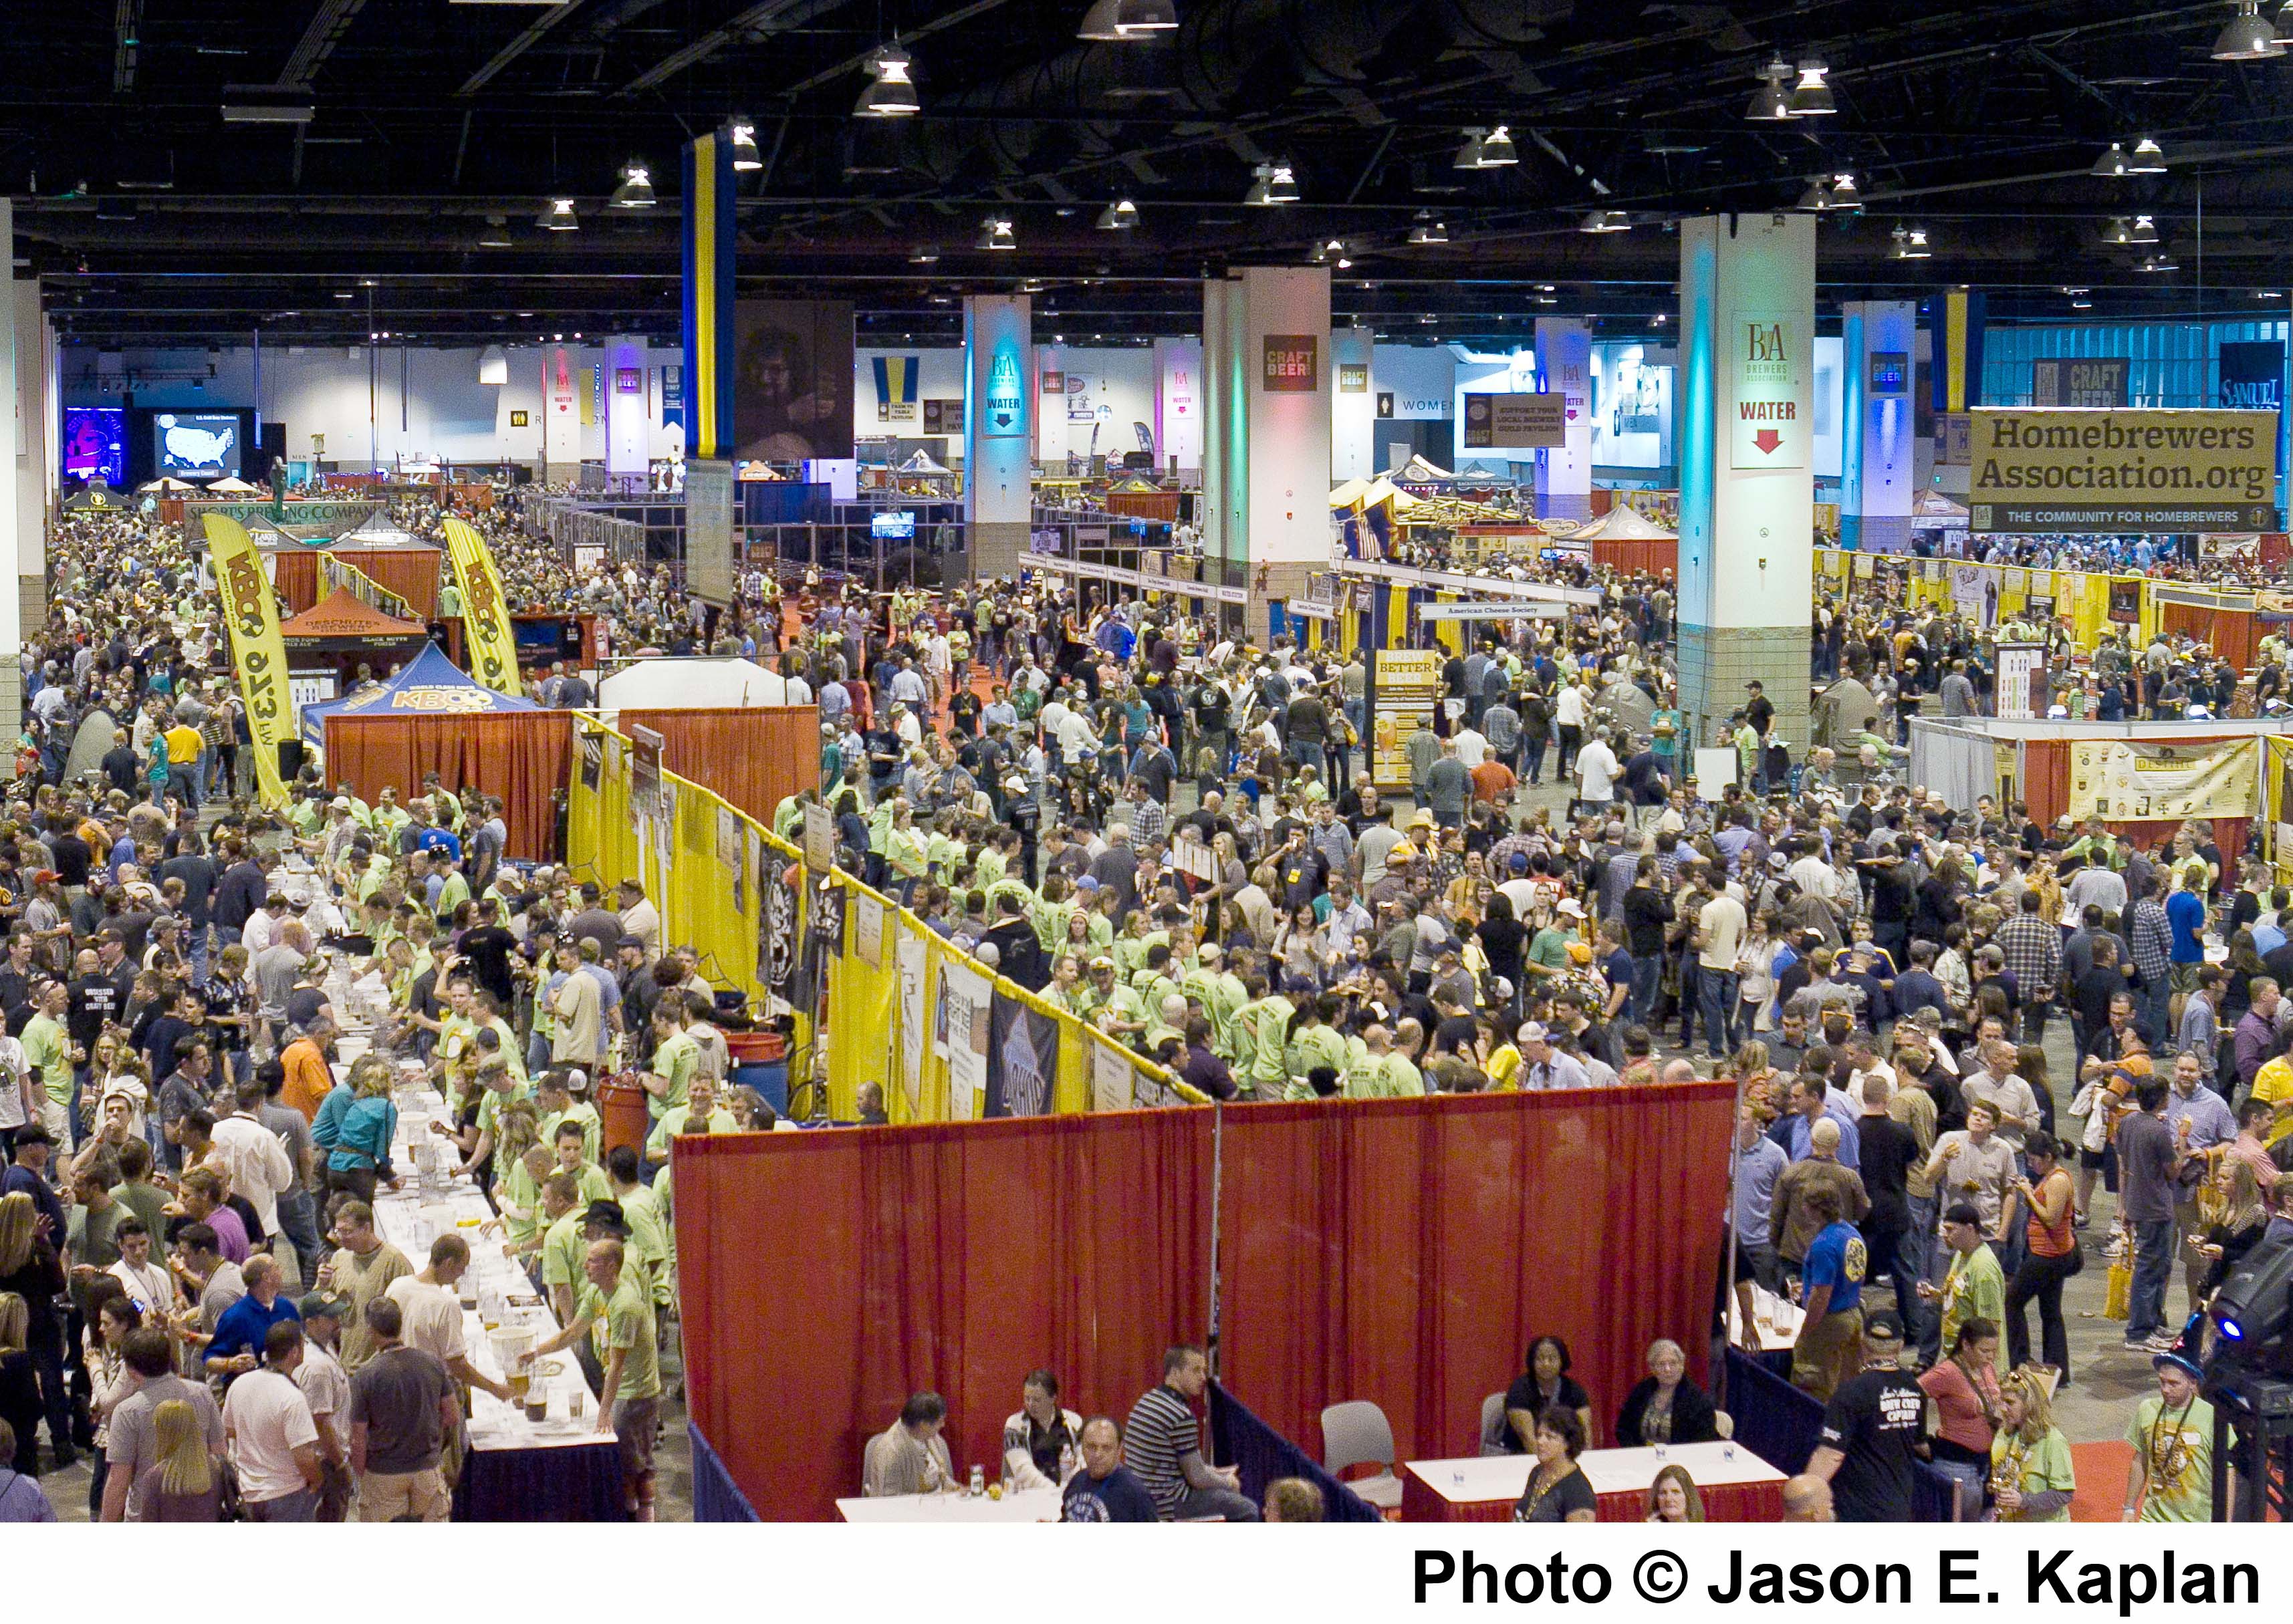 Get Your Tickets for the Great American Beer Festival! GearDiary